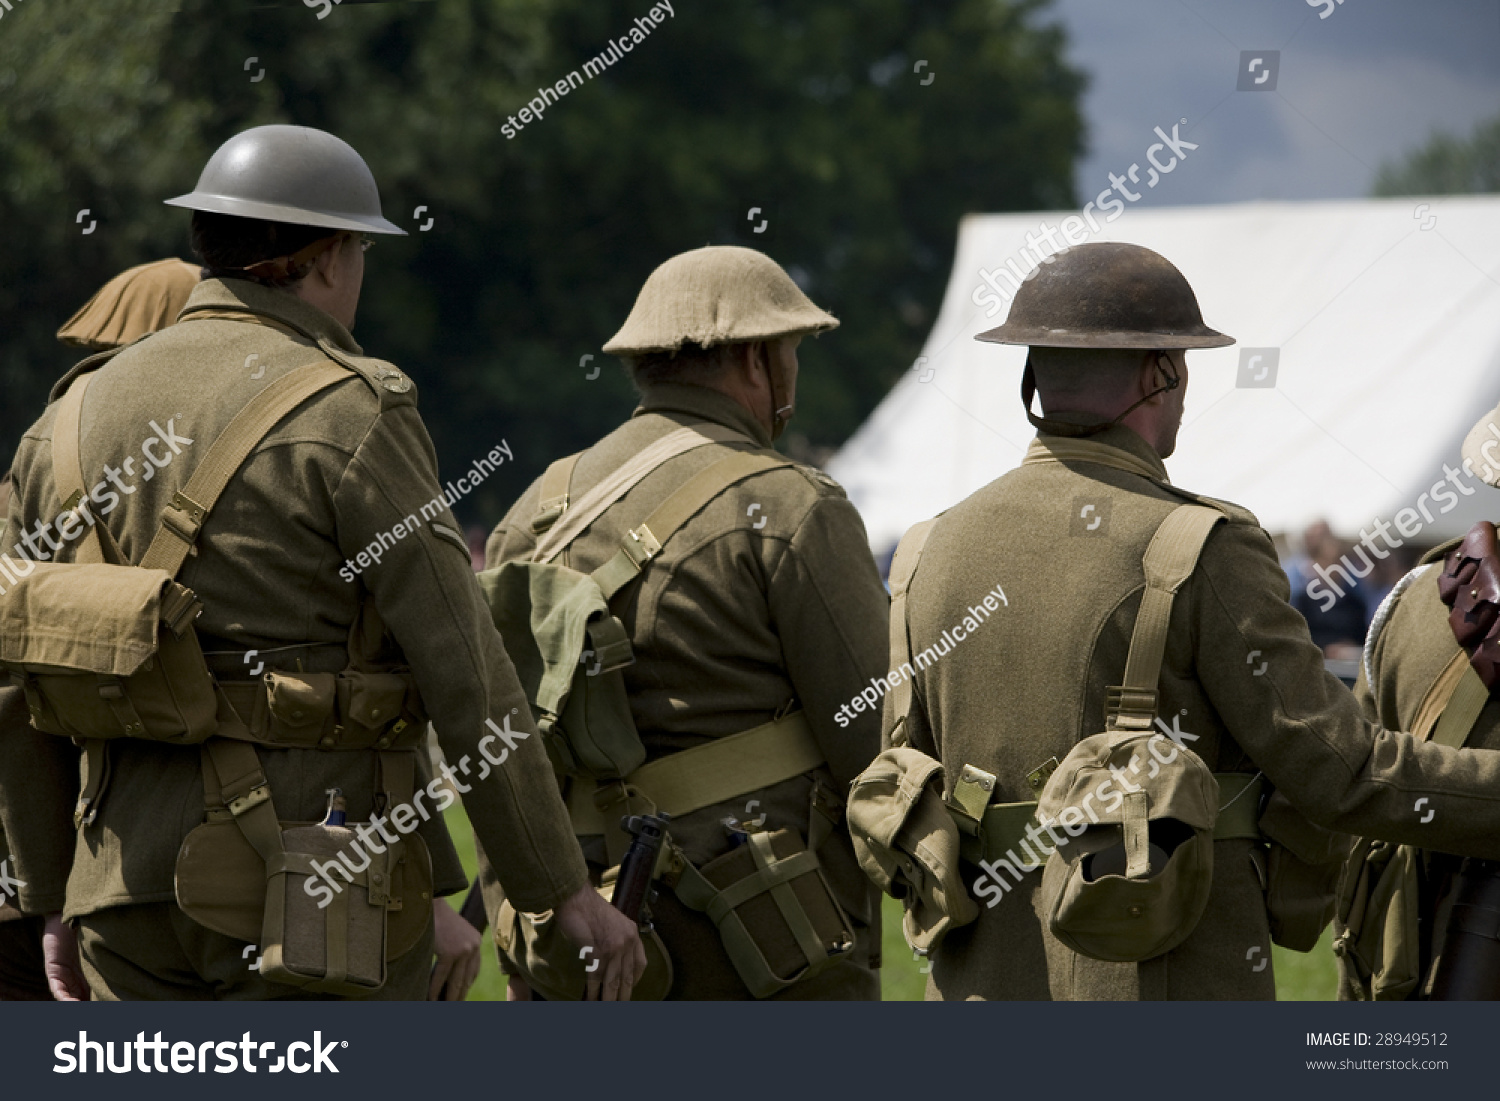 Rear View Some Ww1 British Soldiers Stock Photo 28949512 | Shutterstock